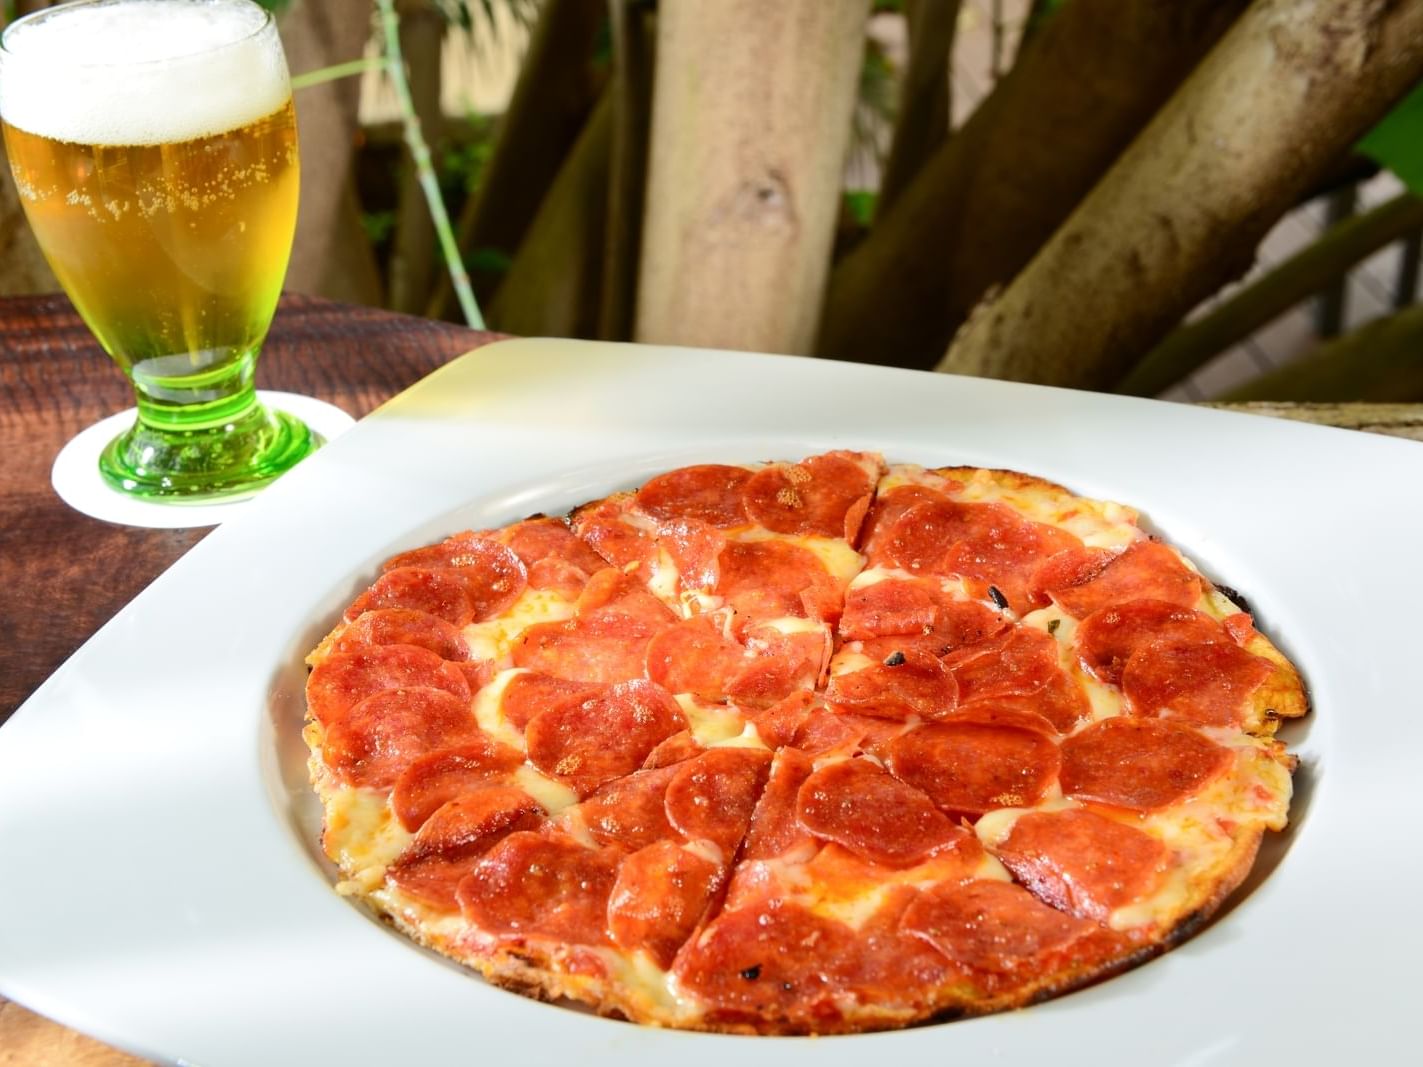 pizza on a white plate with beer glass